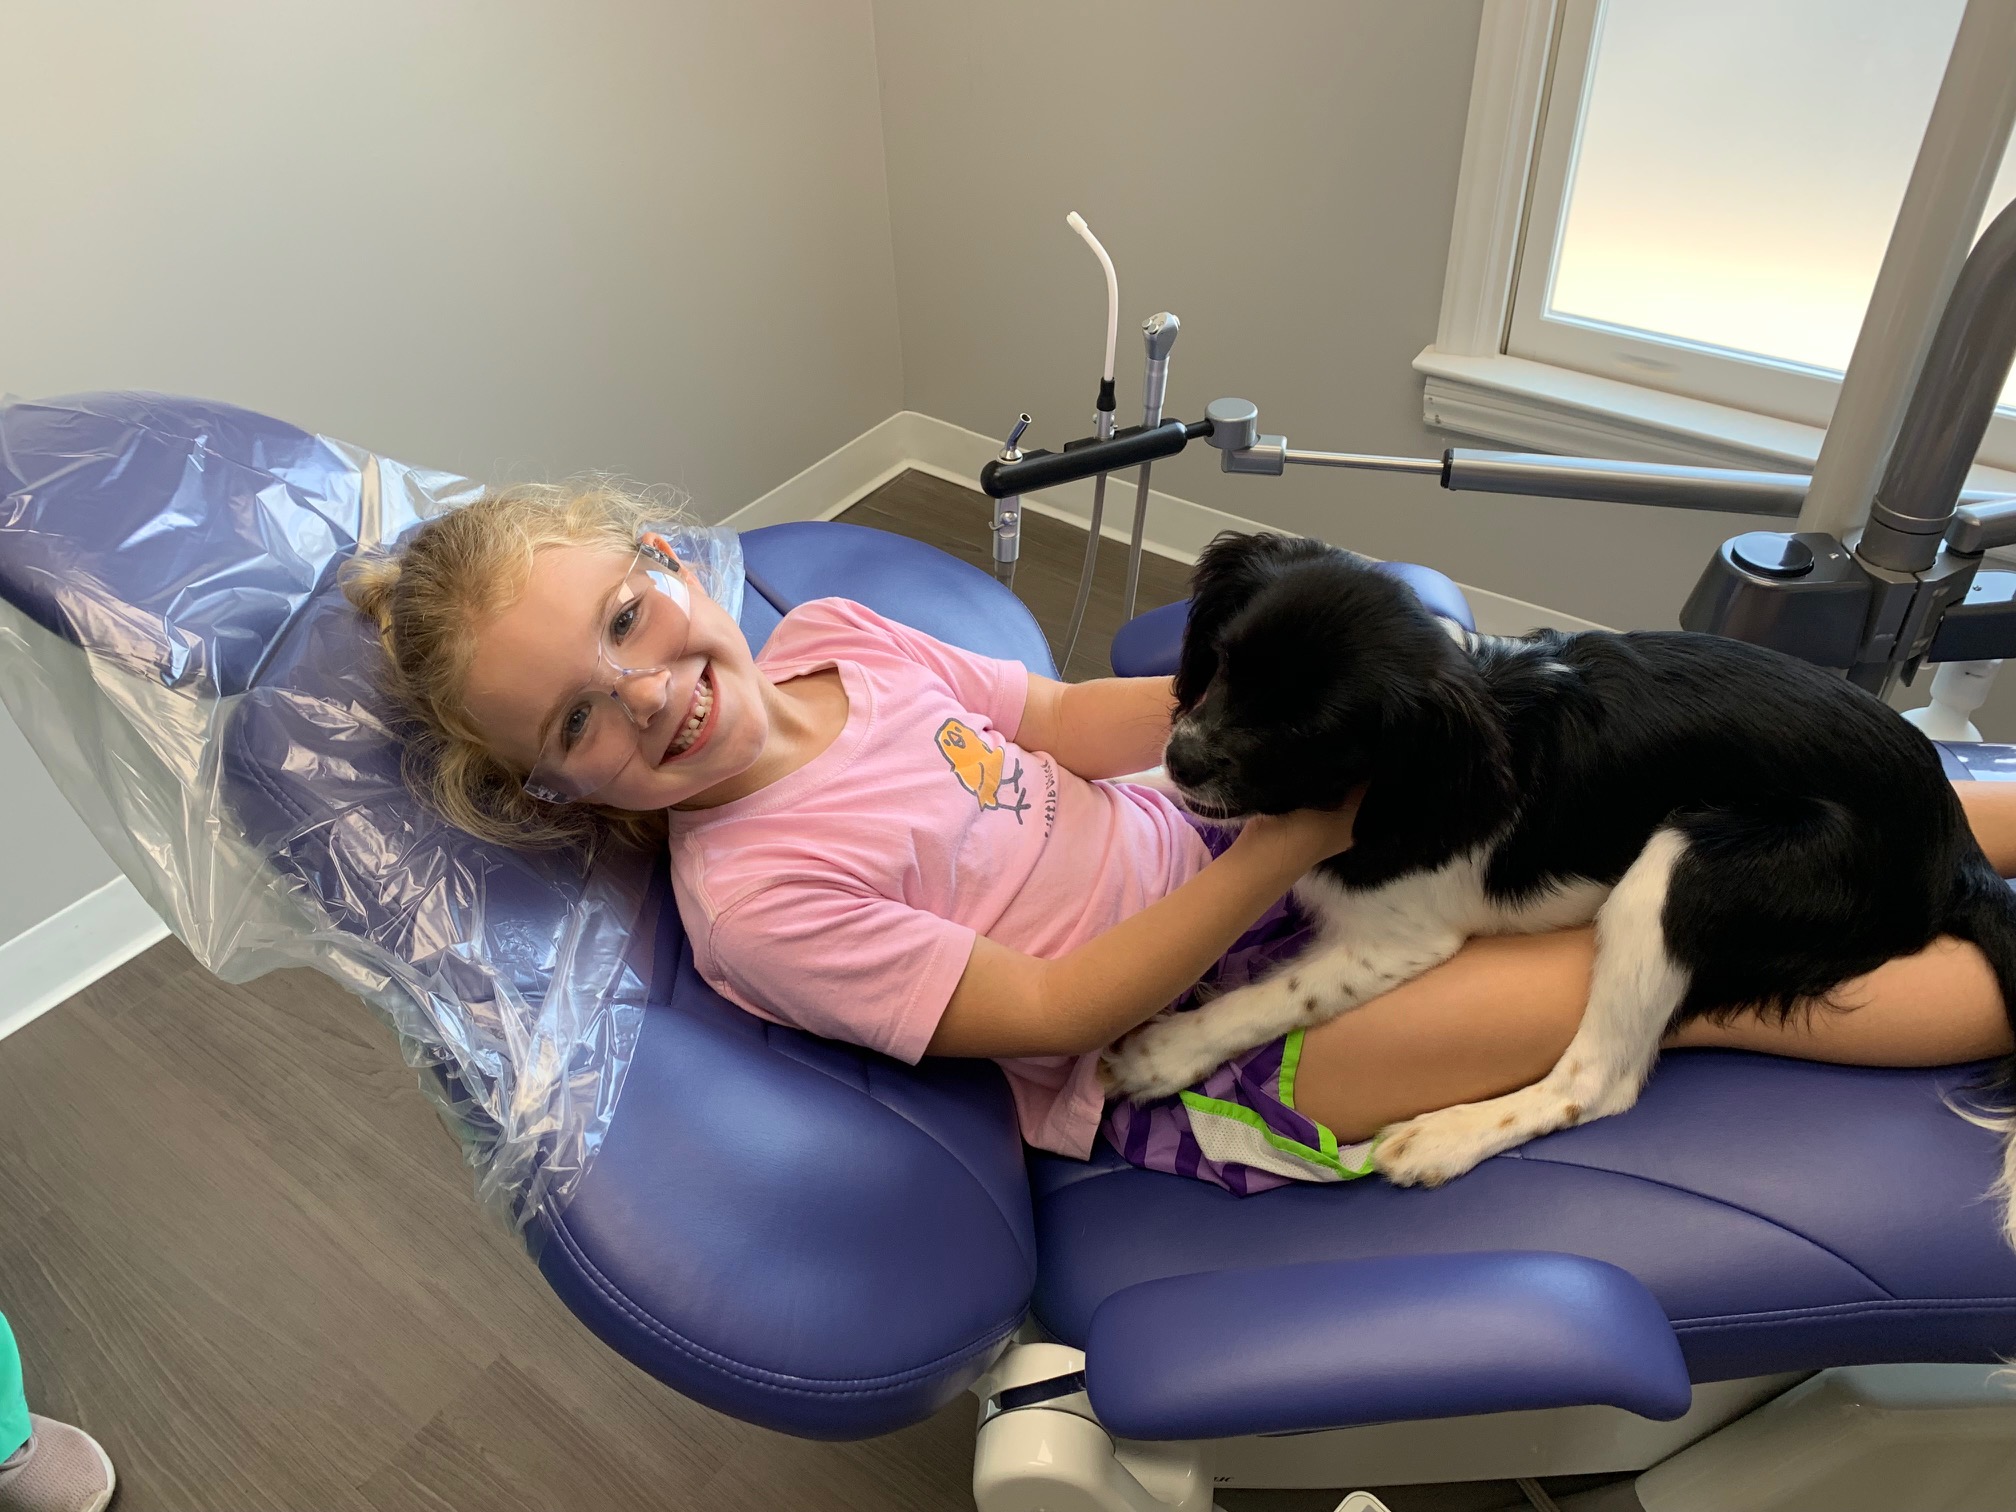 Therapy dogs like Fender are helpful in a dental setting